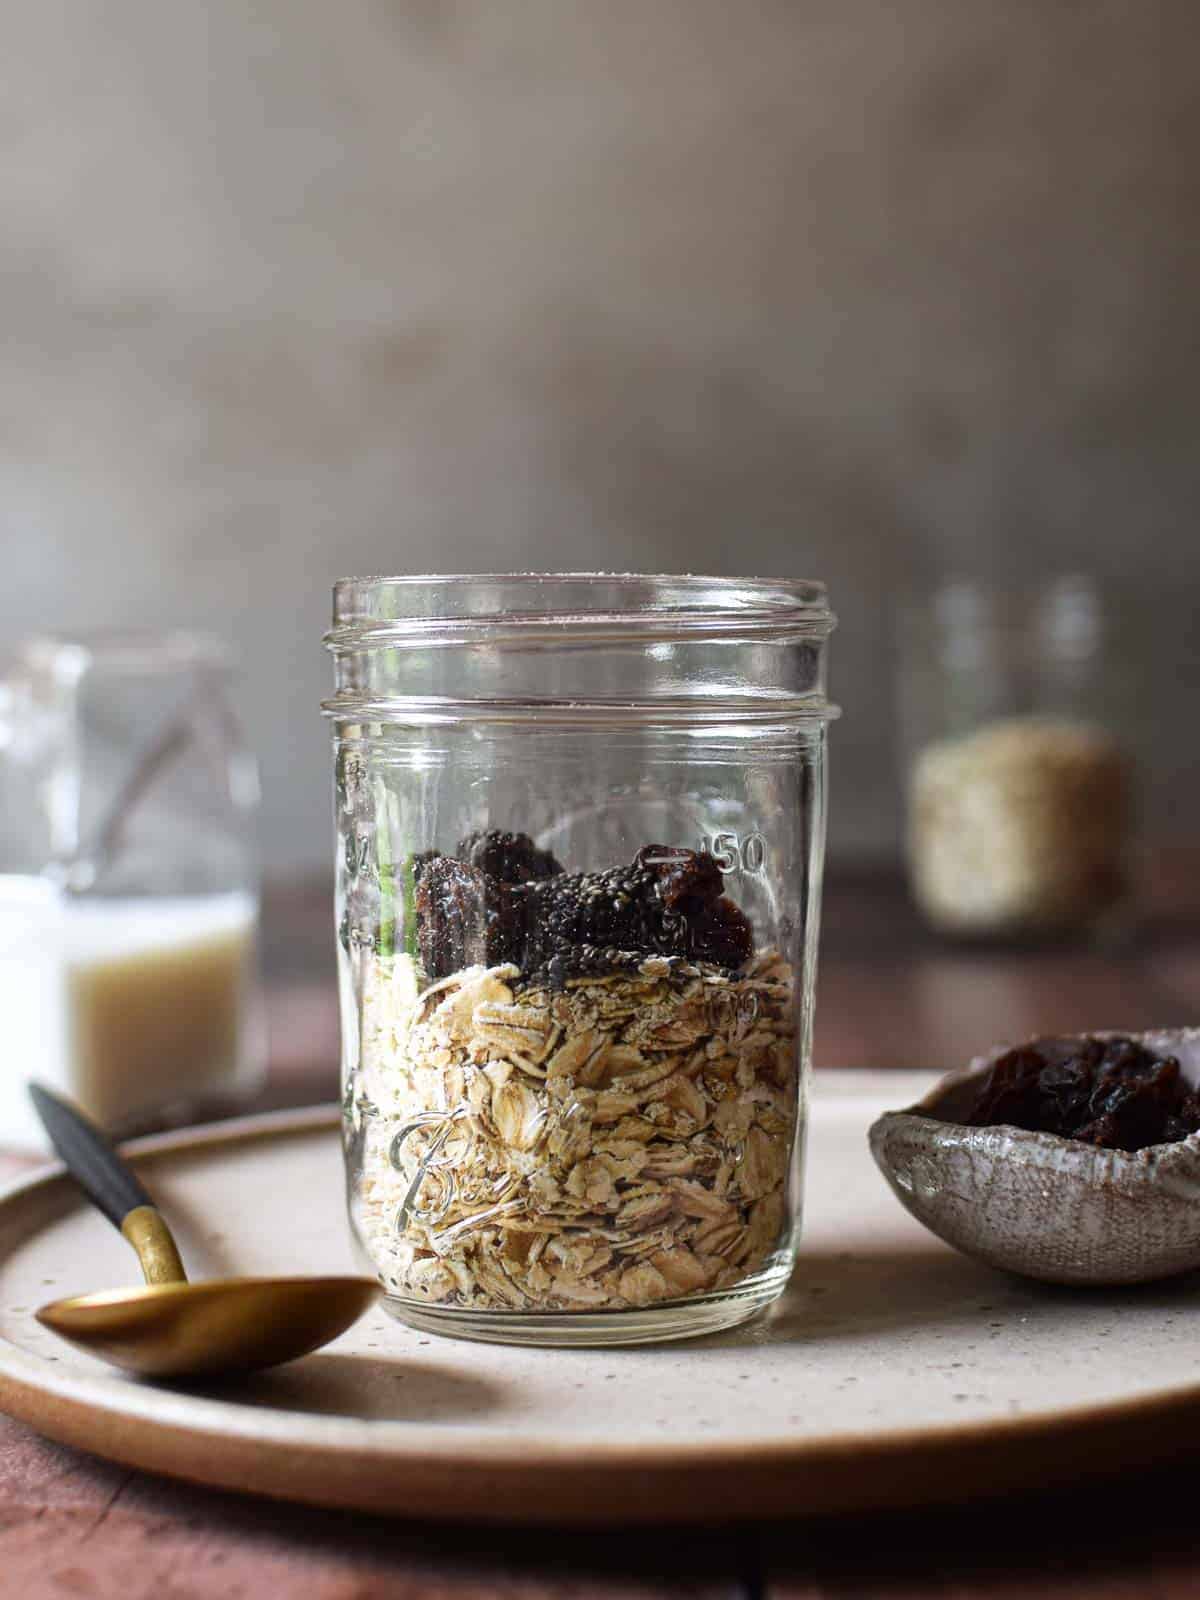 Oats and raisins in a clear jar on a beige plate.